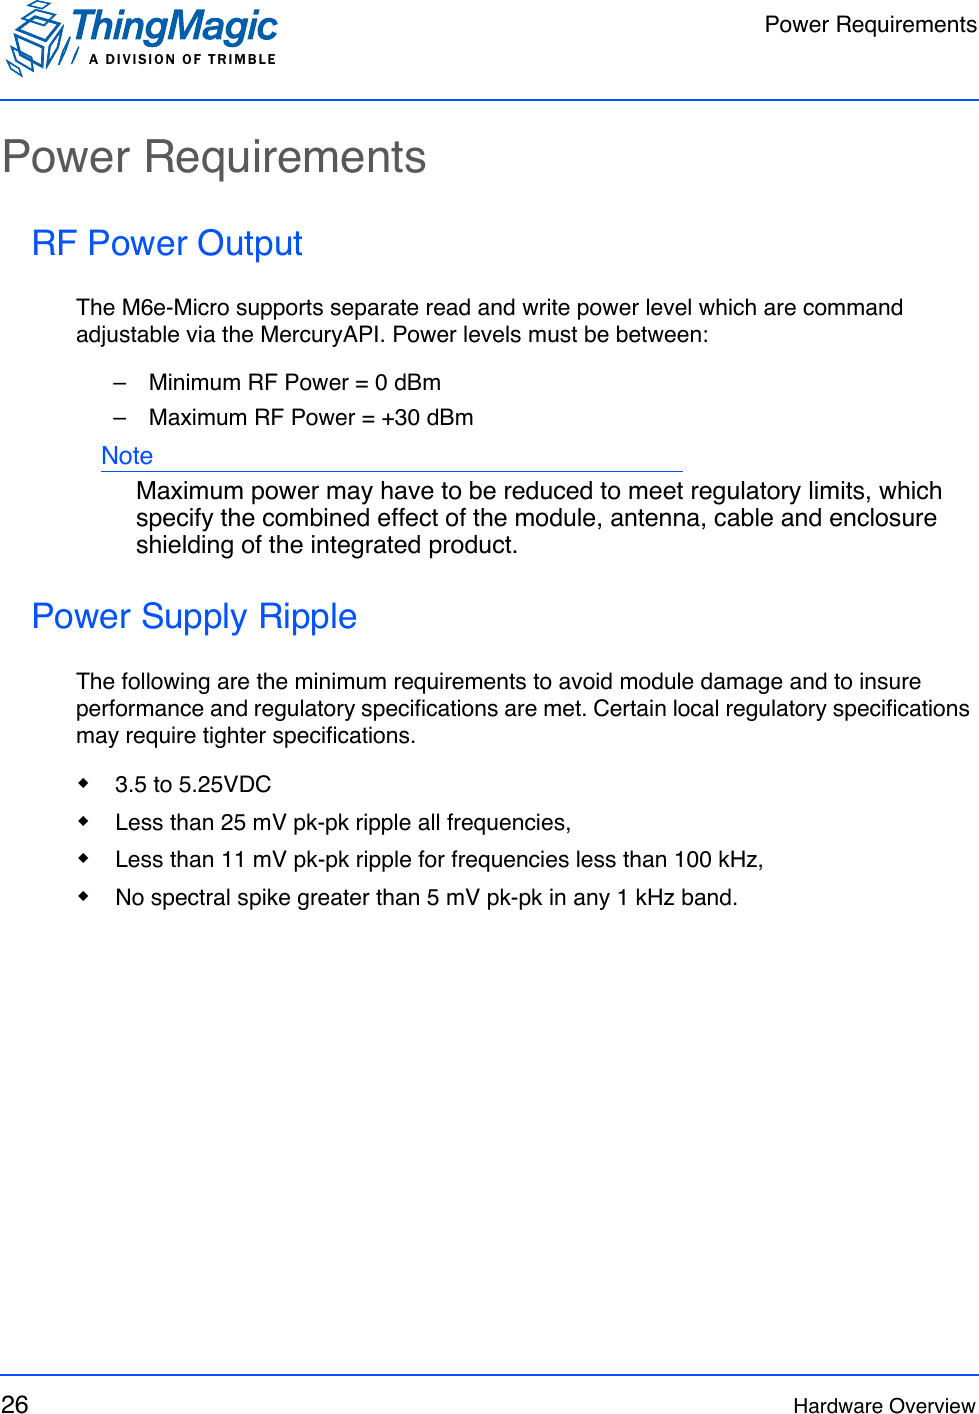 Power RequirementsA DIVISION OF TRIMBLE26 Hardware OverviewPower RequirementsRF Power OutputThe M6e-Micro supports separate read and write power level which are command adjustable via the MercuryAPI. Power levels must be between:–   Minimum RF Power = 0 dBm–   Maximum RF Power = +30 dBmNoteMaximum power may have to be reduced to meet regulatory limits, which specify the combined effect of the module, antenna, cable and enclosure shielding of the integrated product. Power Supply RippleThe following are the minimum requirements to avoid module damage and to insure performance and regulatory specifications are met. Certain local regulatory specifications may require tighter specifications.3.5 to 5.25VDCLess than 25 mV pk-pk ripple all frequencies,Less than 11 mV pk-pk ripple for frequencies less than 100 kHz,No spectral spike greater than 5 mV pk-pk in any 1 kHz band.